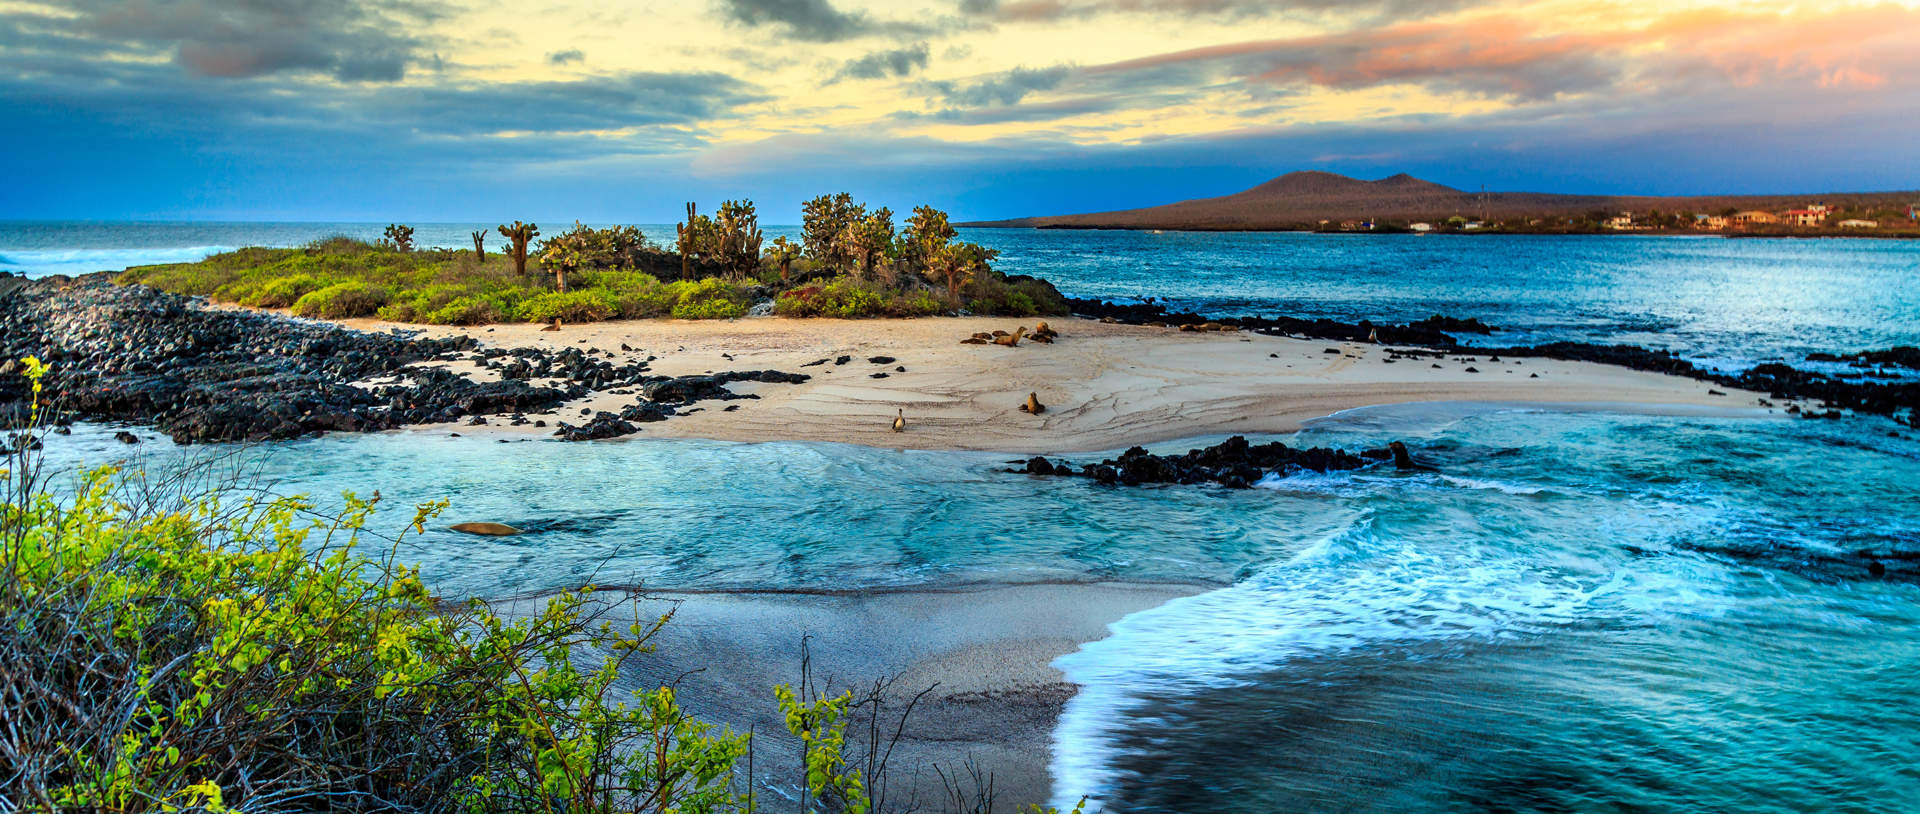 View Of The Galapagos Islands